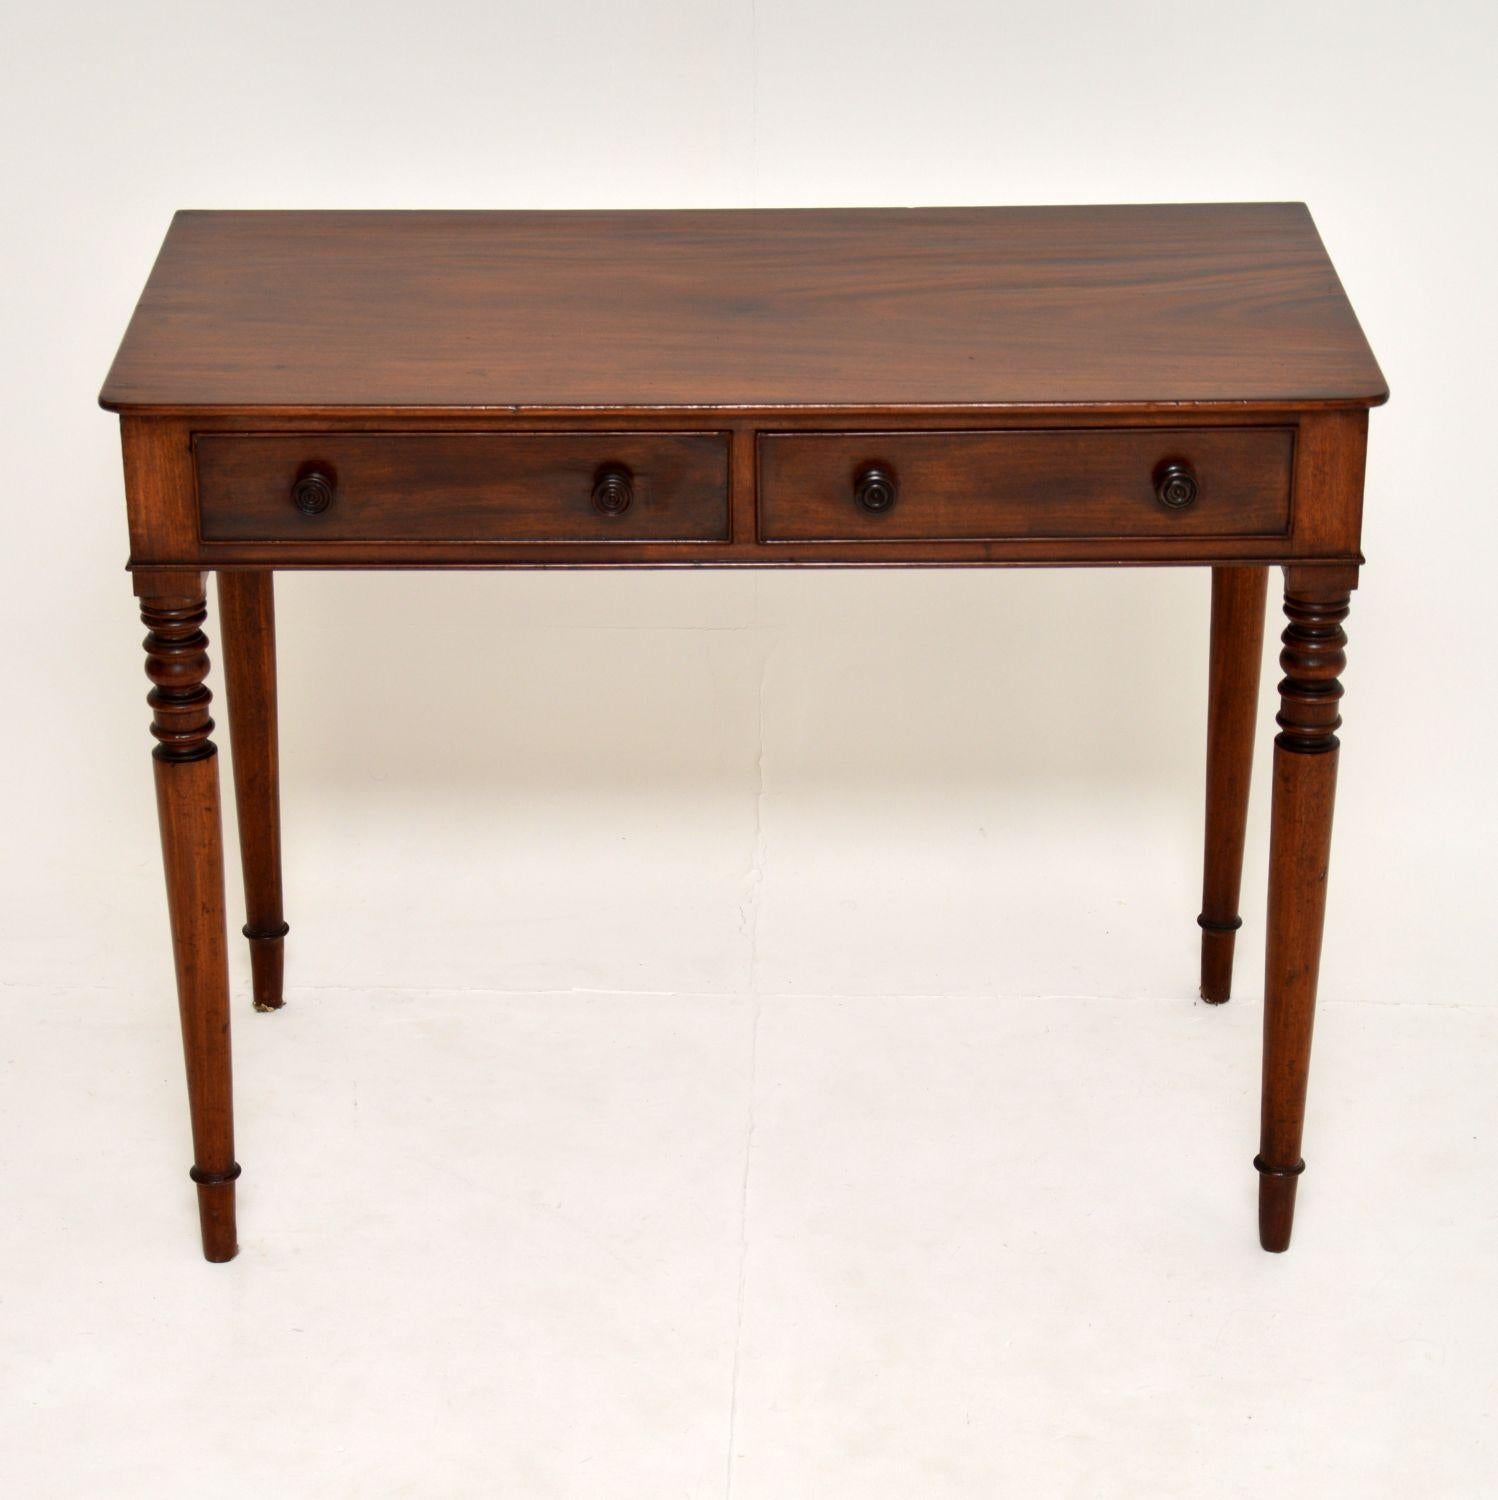 A gorgeous antique William IV writing table in solid mahogany, which could be just used as a side table. This dates from circa 1830-1840 period.

It is of extremely high quality, with beautifully elegant turned legs and handles, and solid wood